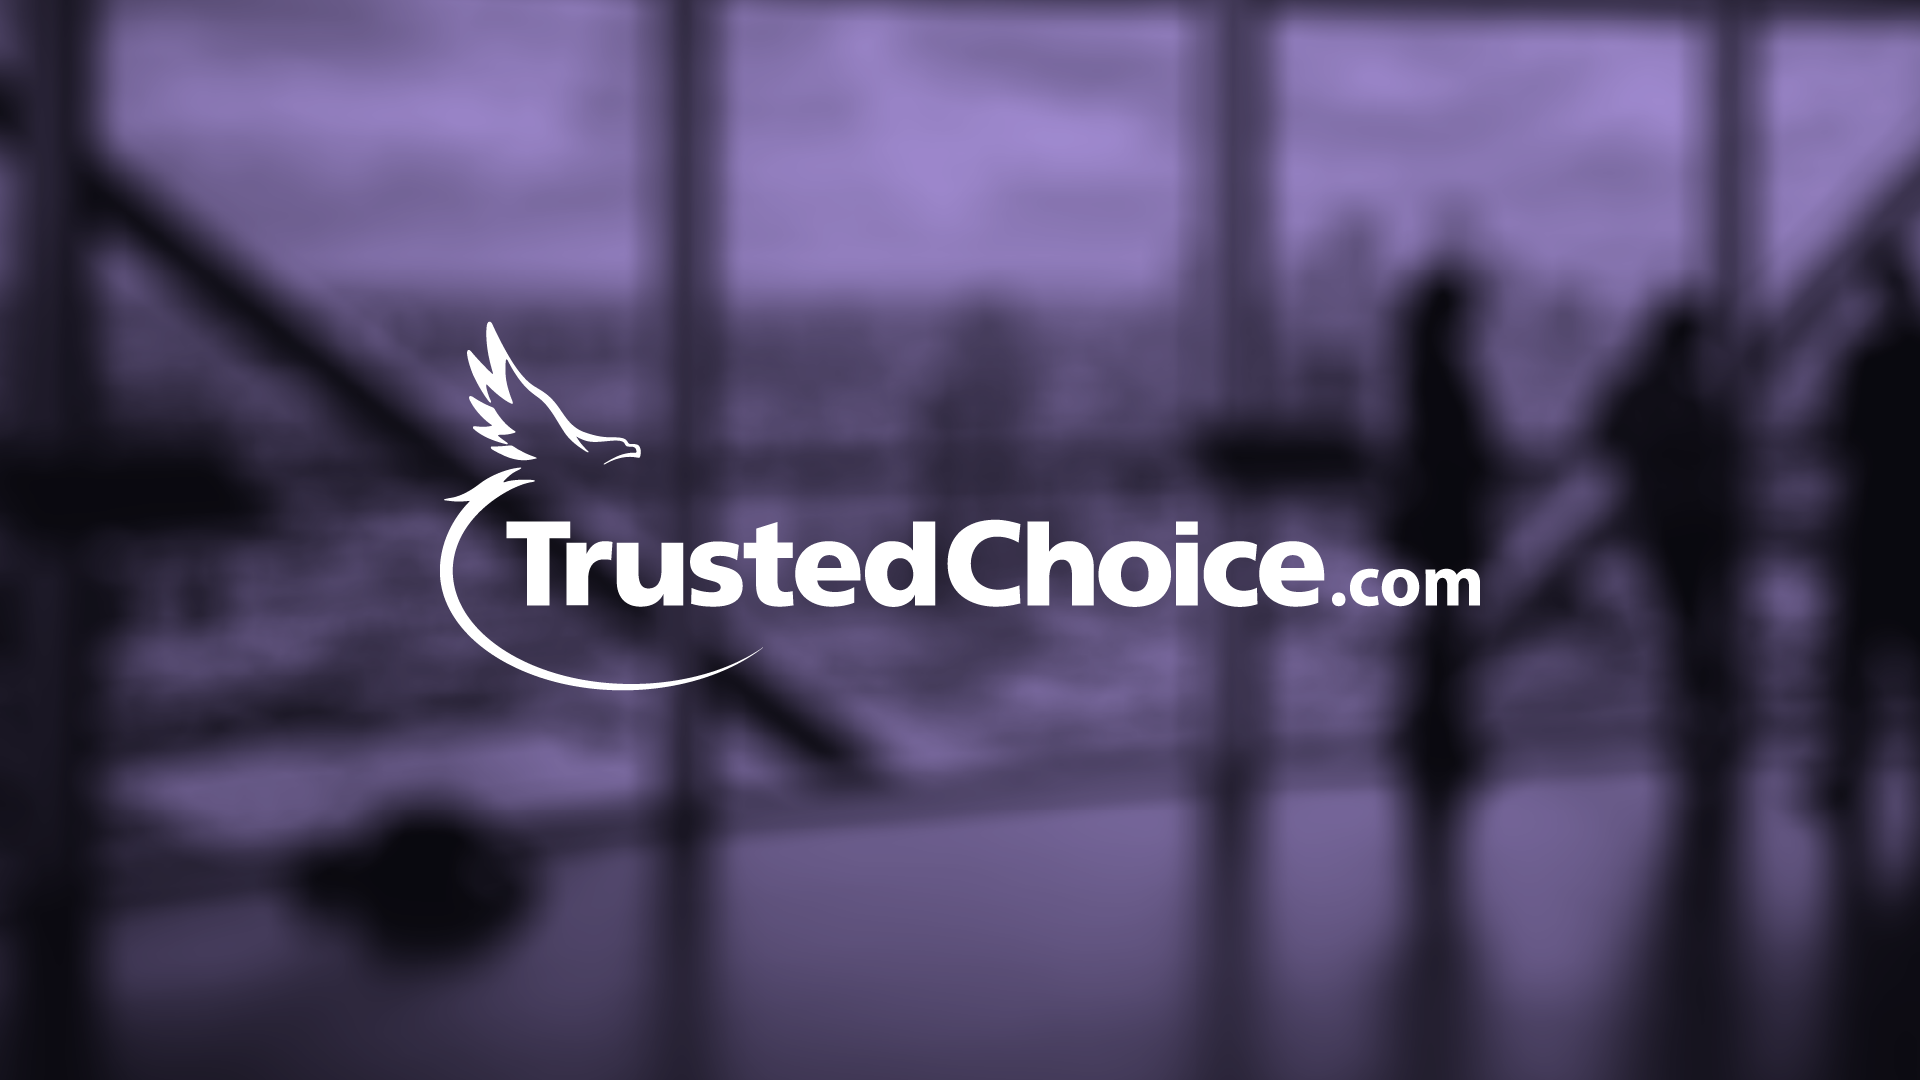 For TrustedChoice.com, D2iQ Proves to Be the Right Choice for Modernizing Its Business Platform